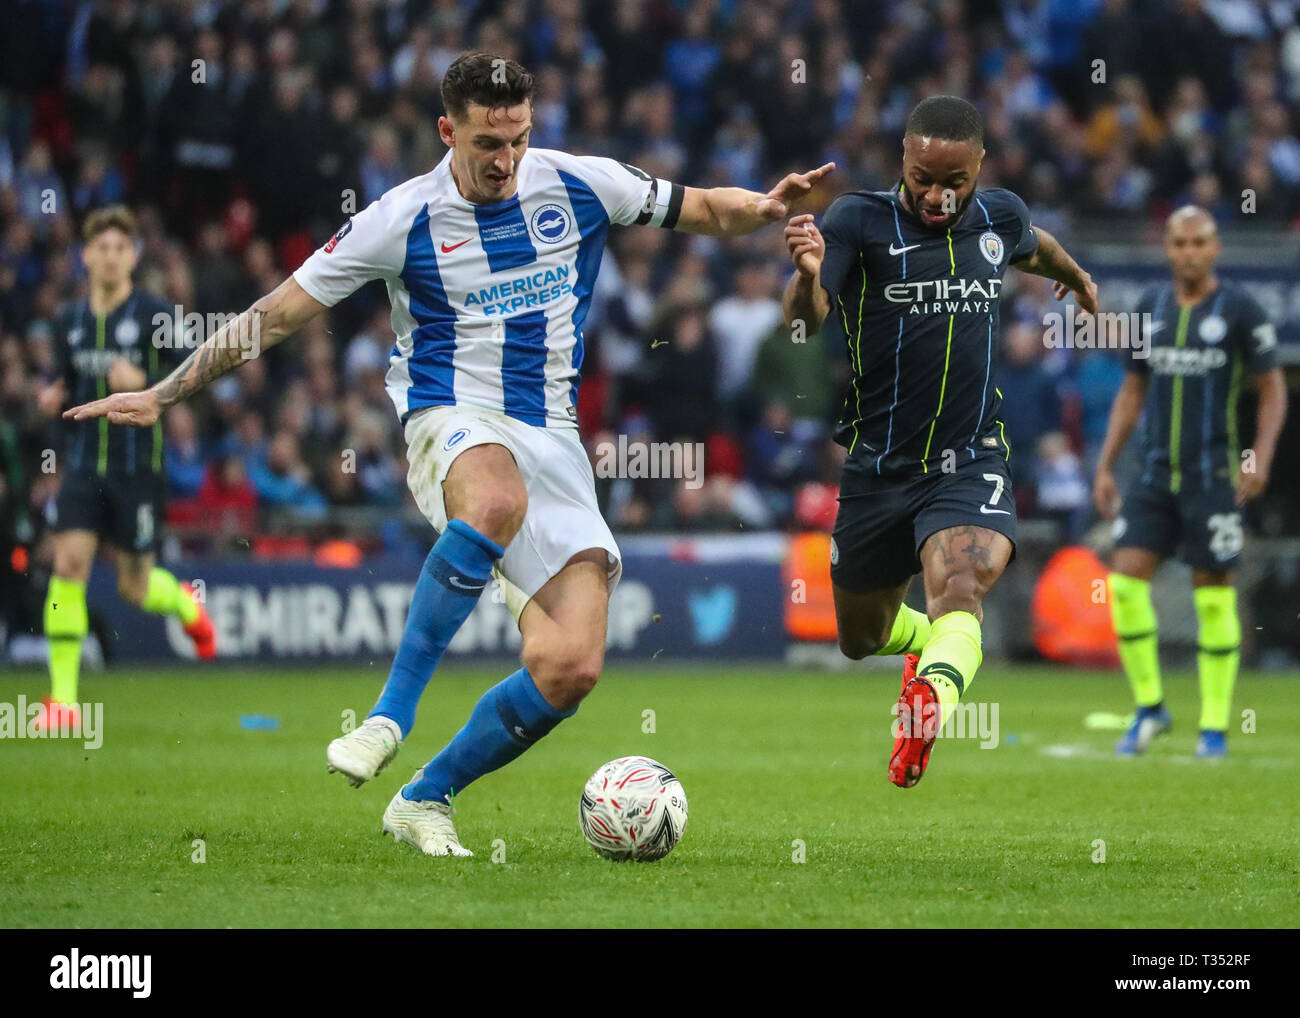 Wembley, London, UK. 06th Apr, 2019.Raheem Sterling of Manchester City and Lewis Dunk of Brighton & Hove Albion during the Emirates FA Cup Semi Final match between Manchester City and Brighton & Hove Albion at WWembley Stadium on April 6th 2019 in London, England. (Photo by John Rainford/phcimages.com) Credit: PHC Images/Alamy Live NewsEditorial use only, license required for commercial use. No use in betting, Stock Photo